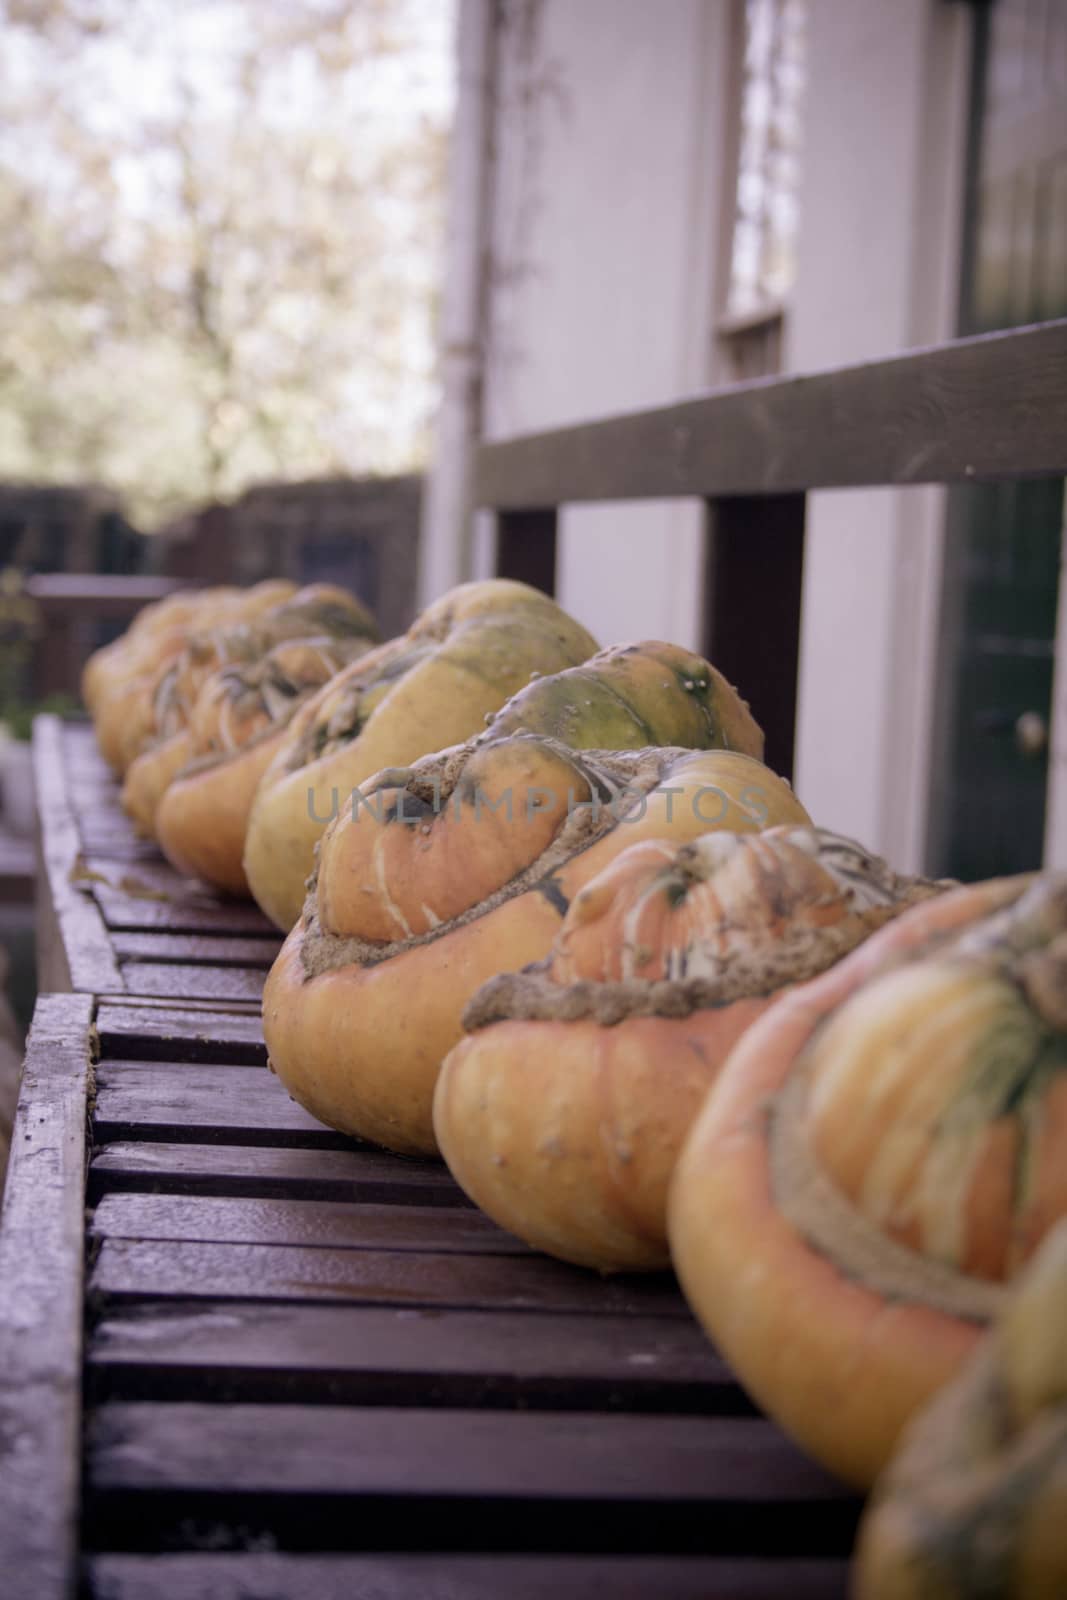 A row of pumpkins lined up on a bench in front of Charles Darwin's house.